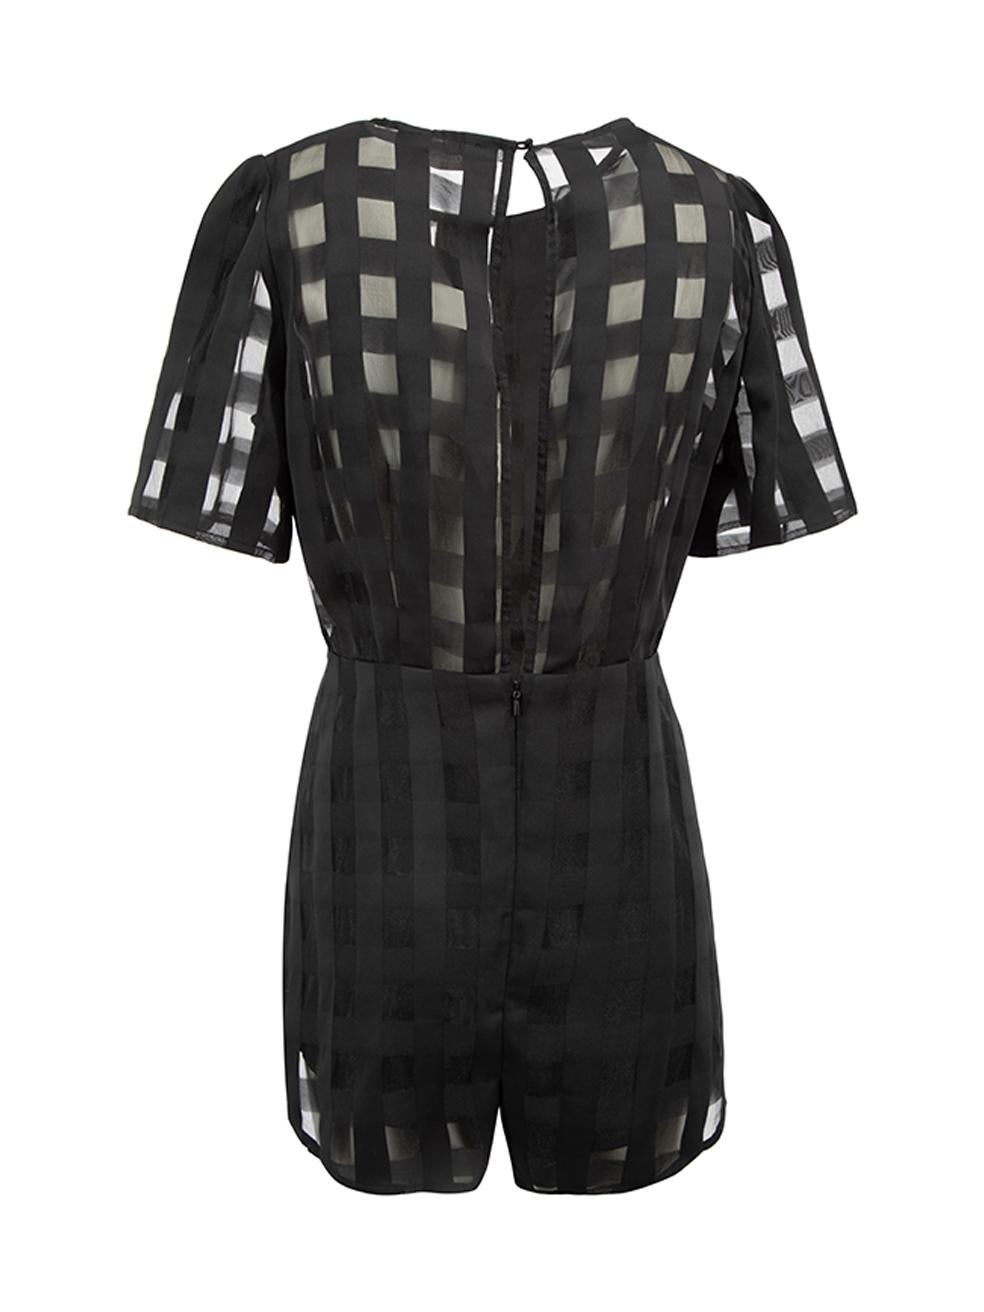 Alice McCall Black Sheer Checkered Short Sleeve Playsuit Size M In Good Condition For Sale In London, GB